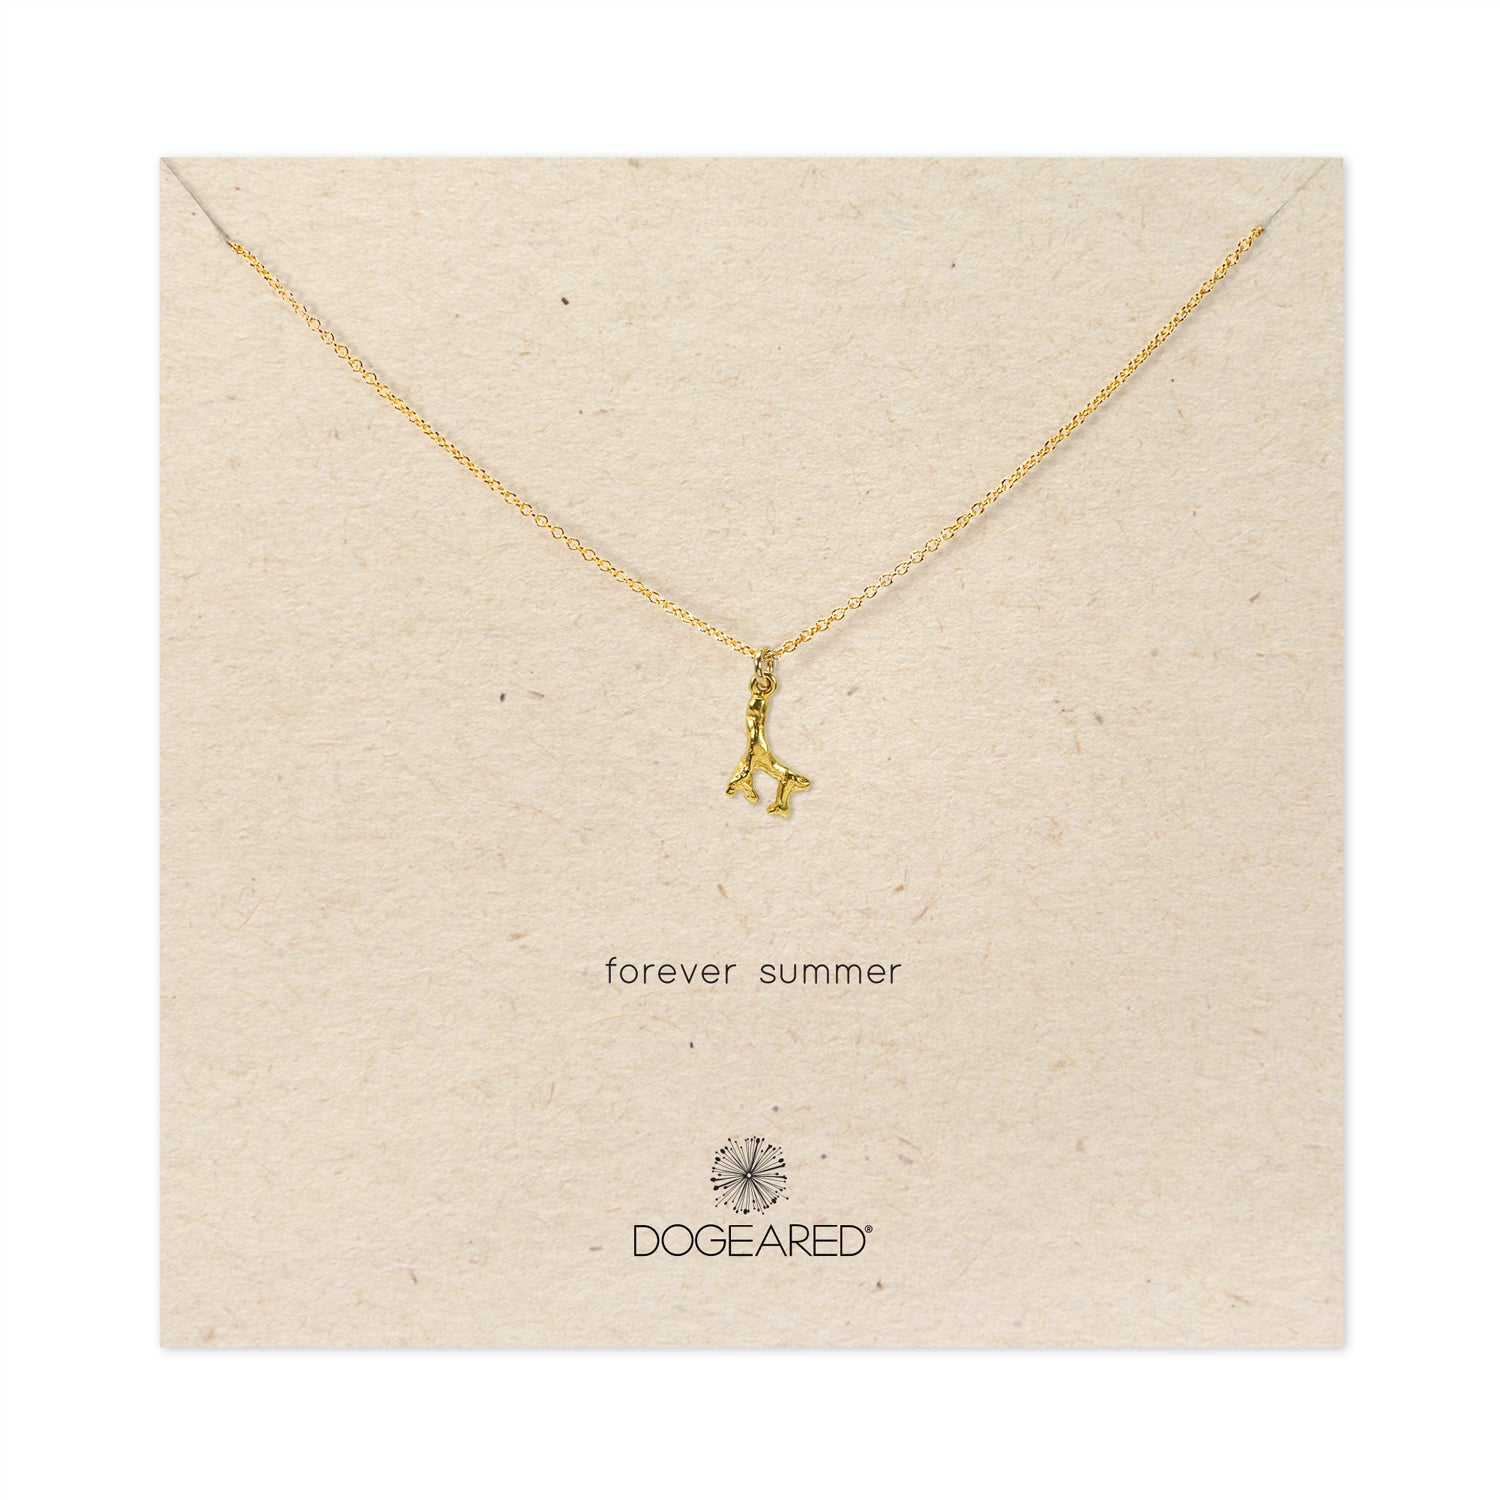 forever summer coral branch necklace